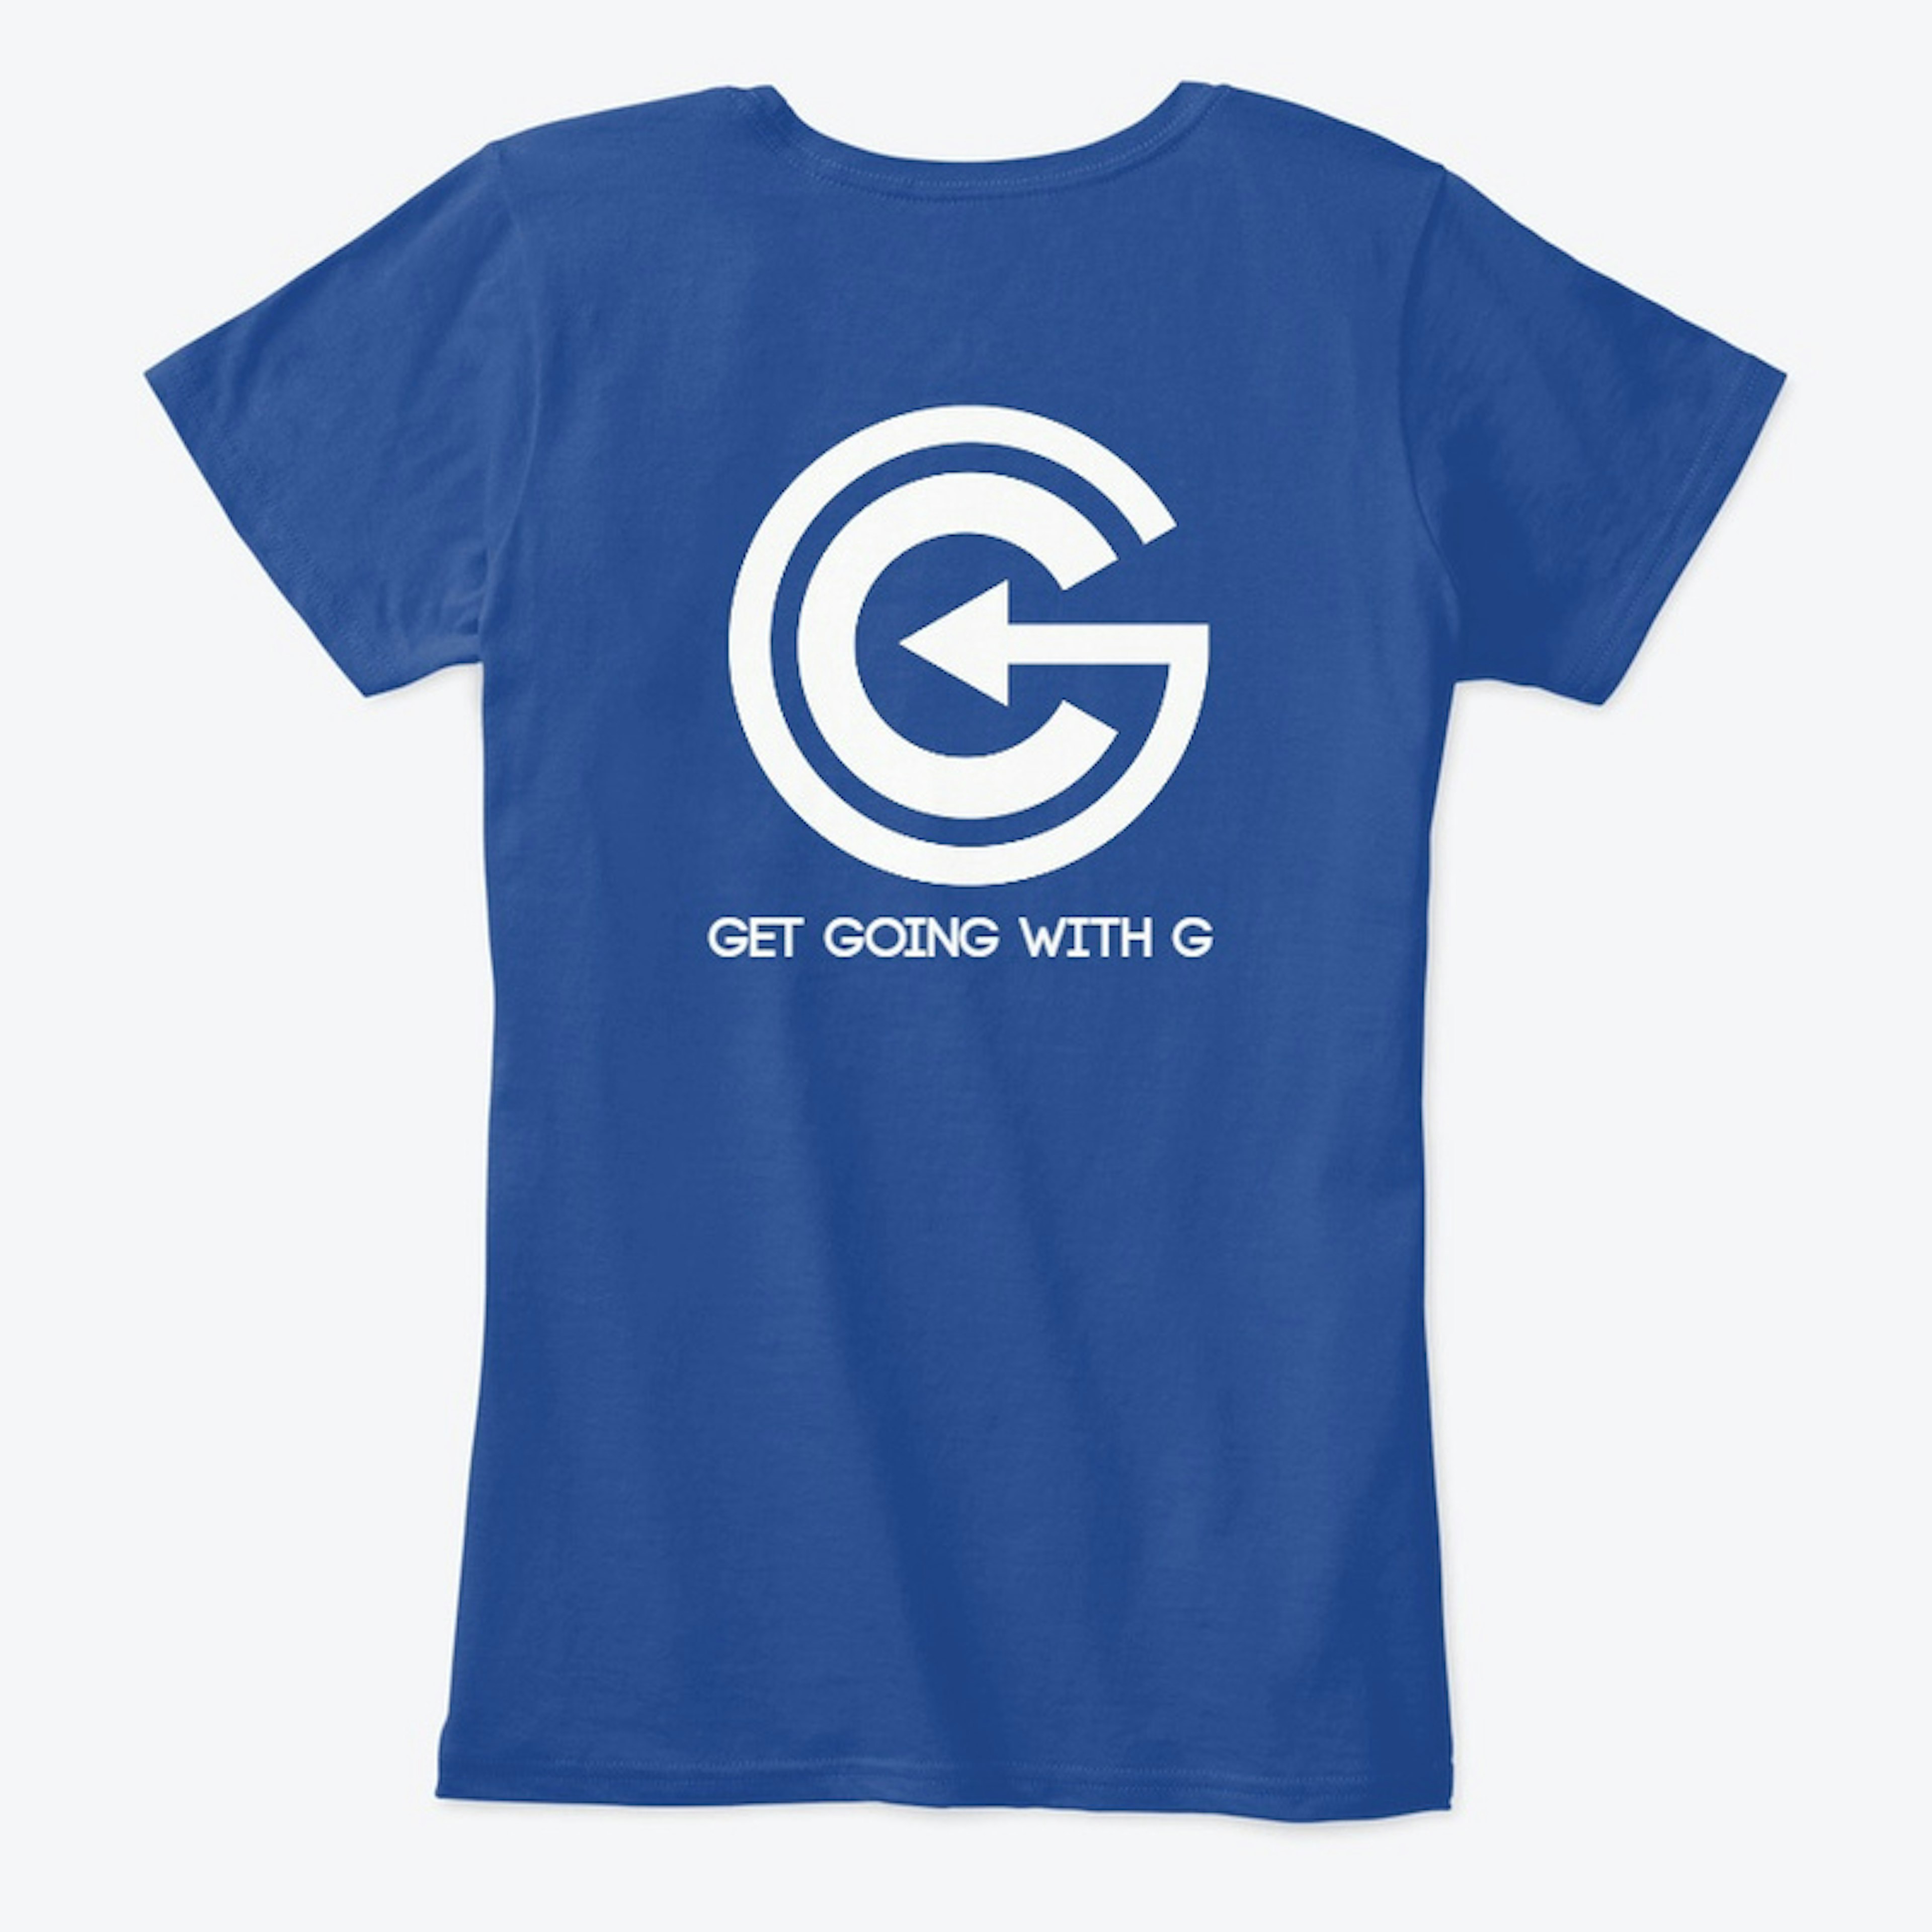 Get Going with G